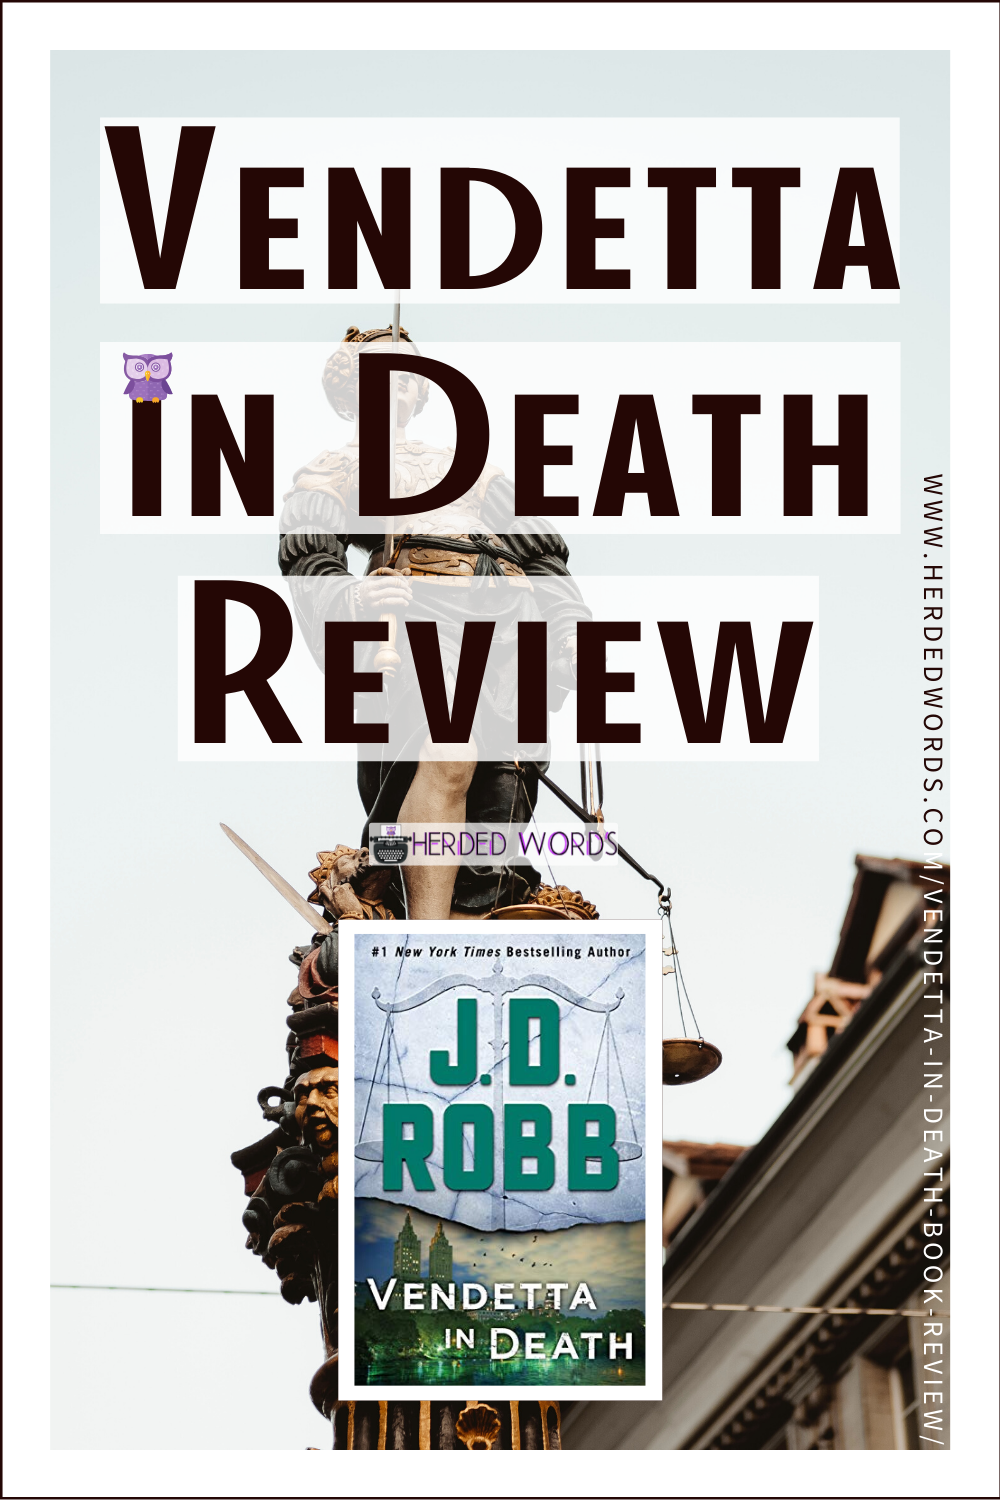 Pin This: Book Review & Analysis of VENDETTA IN DEATH